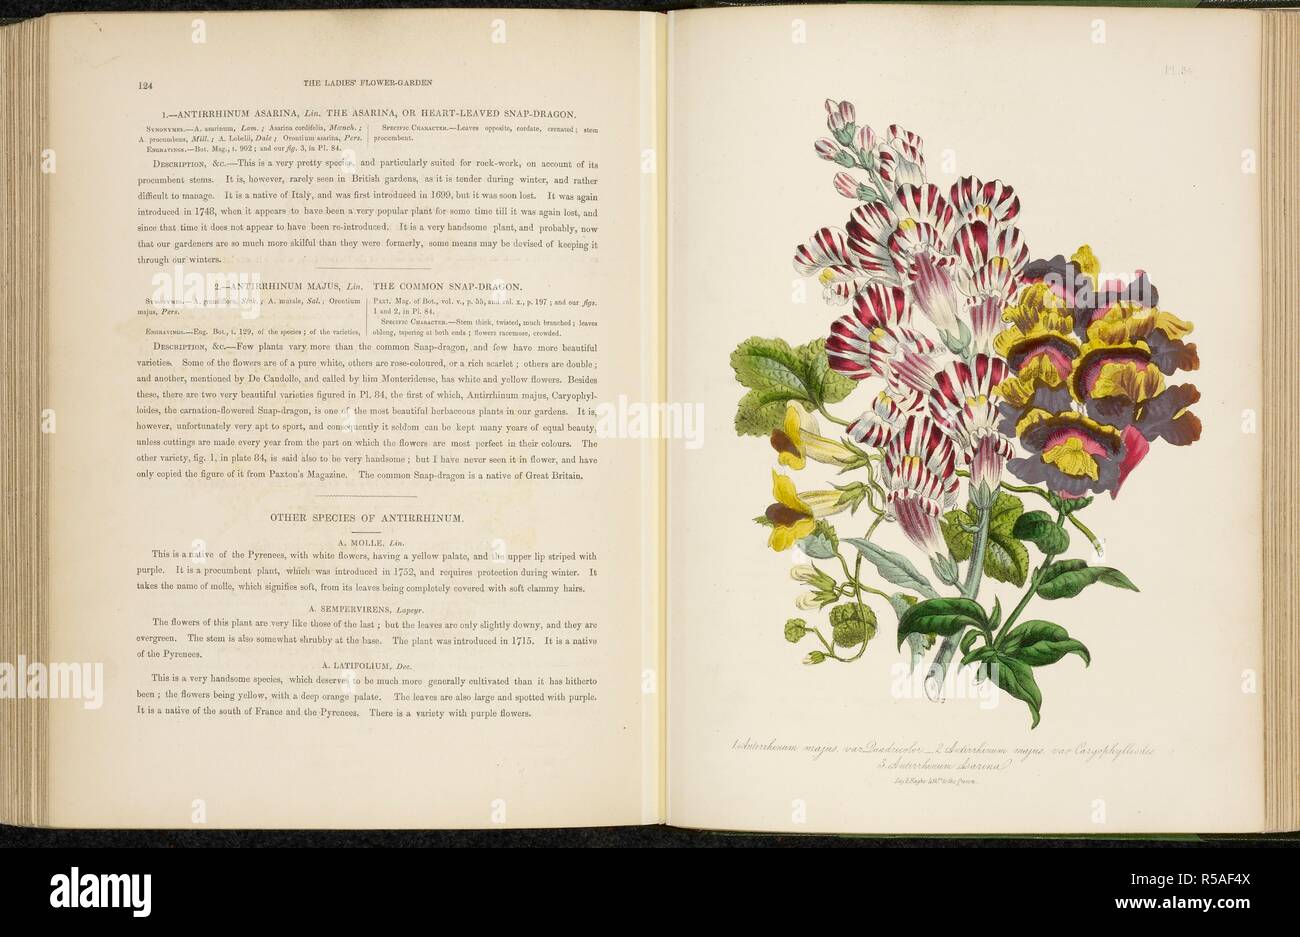 Antirrhinum Majus, lin. The common snap-dragon.  Text and colour botanical plate of a flowering plant. The ladies' flower-garden of ornamental perennials. London, 1843-44. Source: 722.l.6 plate 84. Language: English. Stock Photo